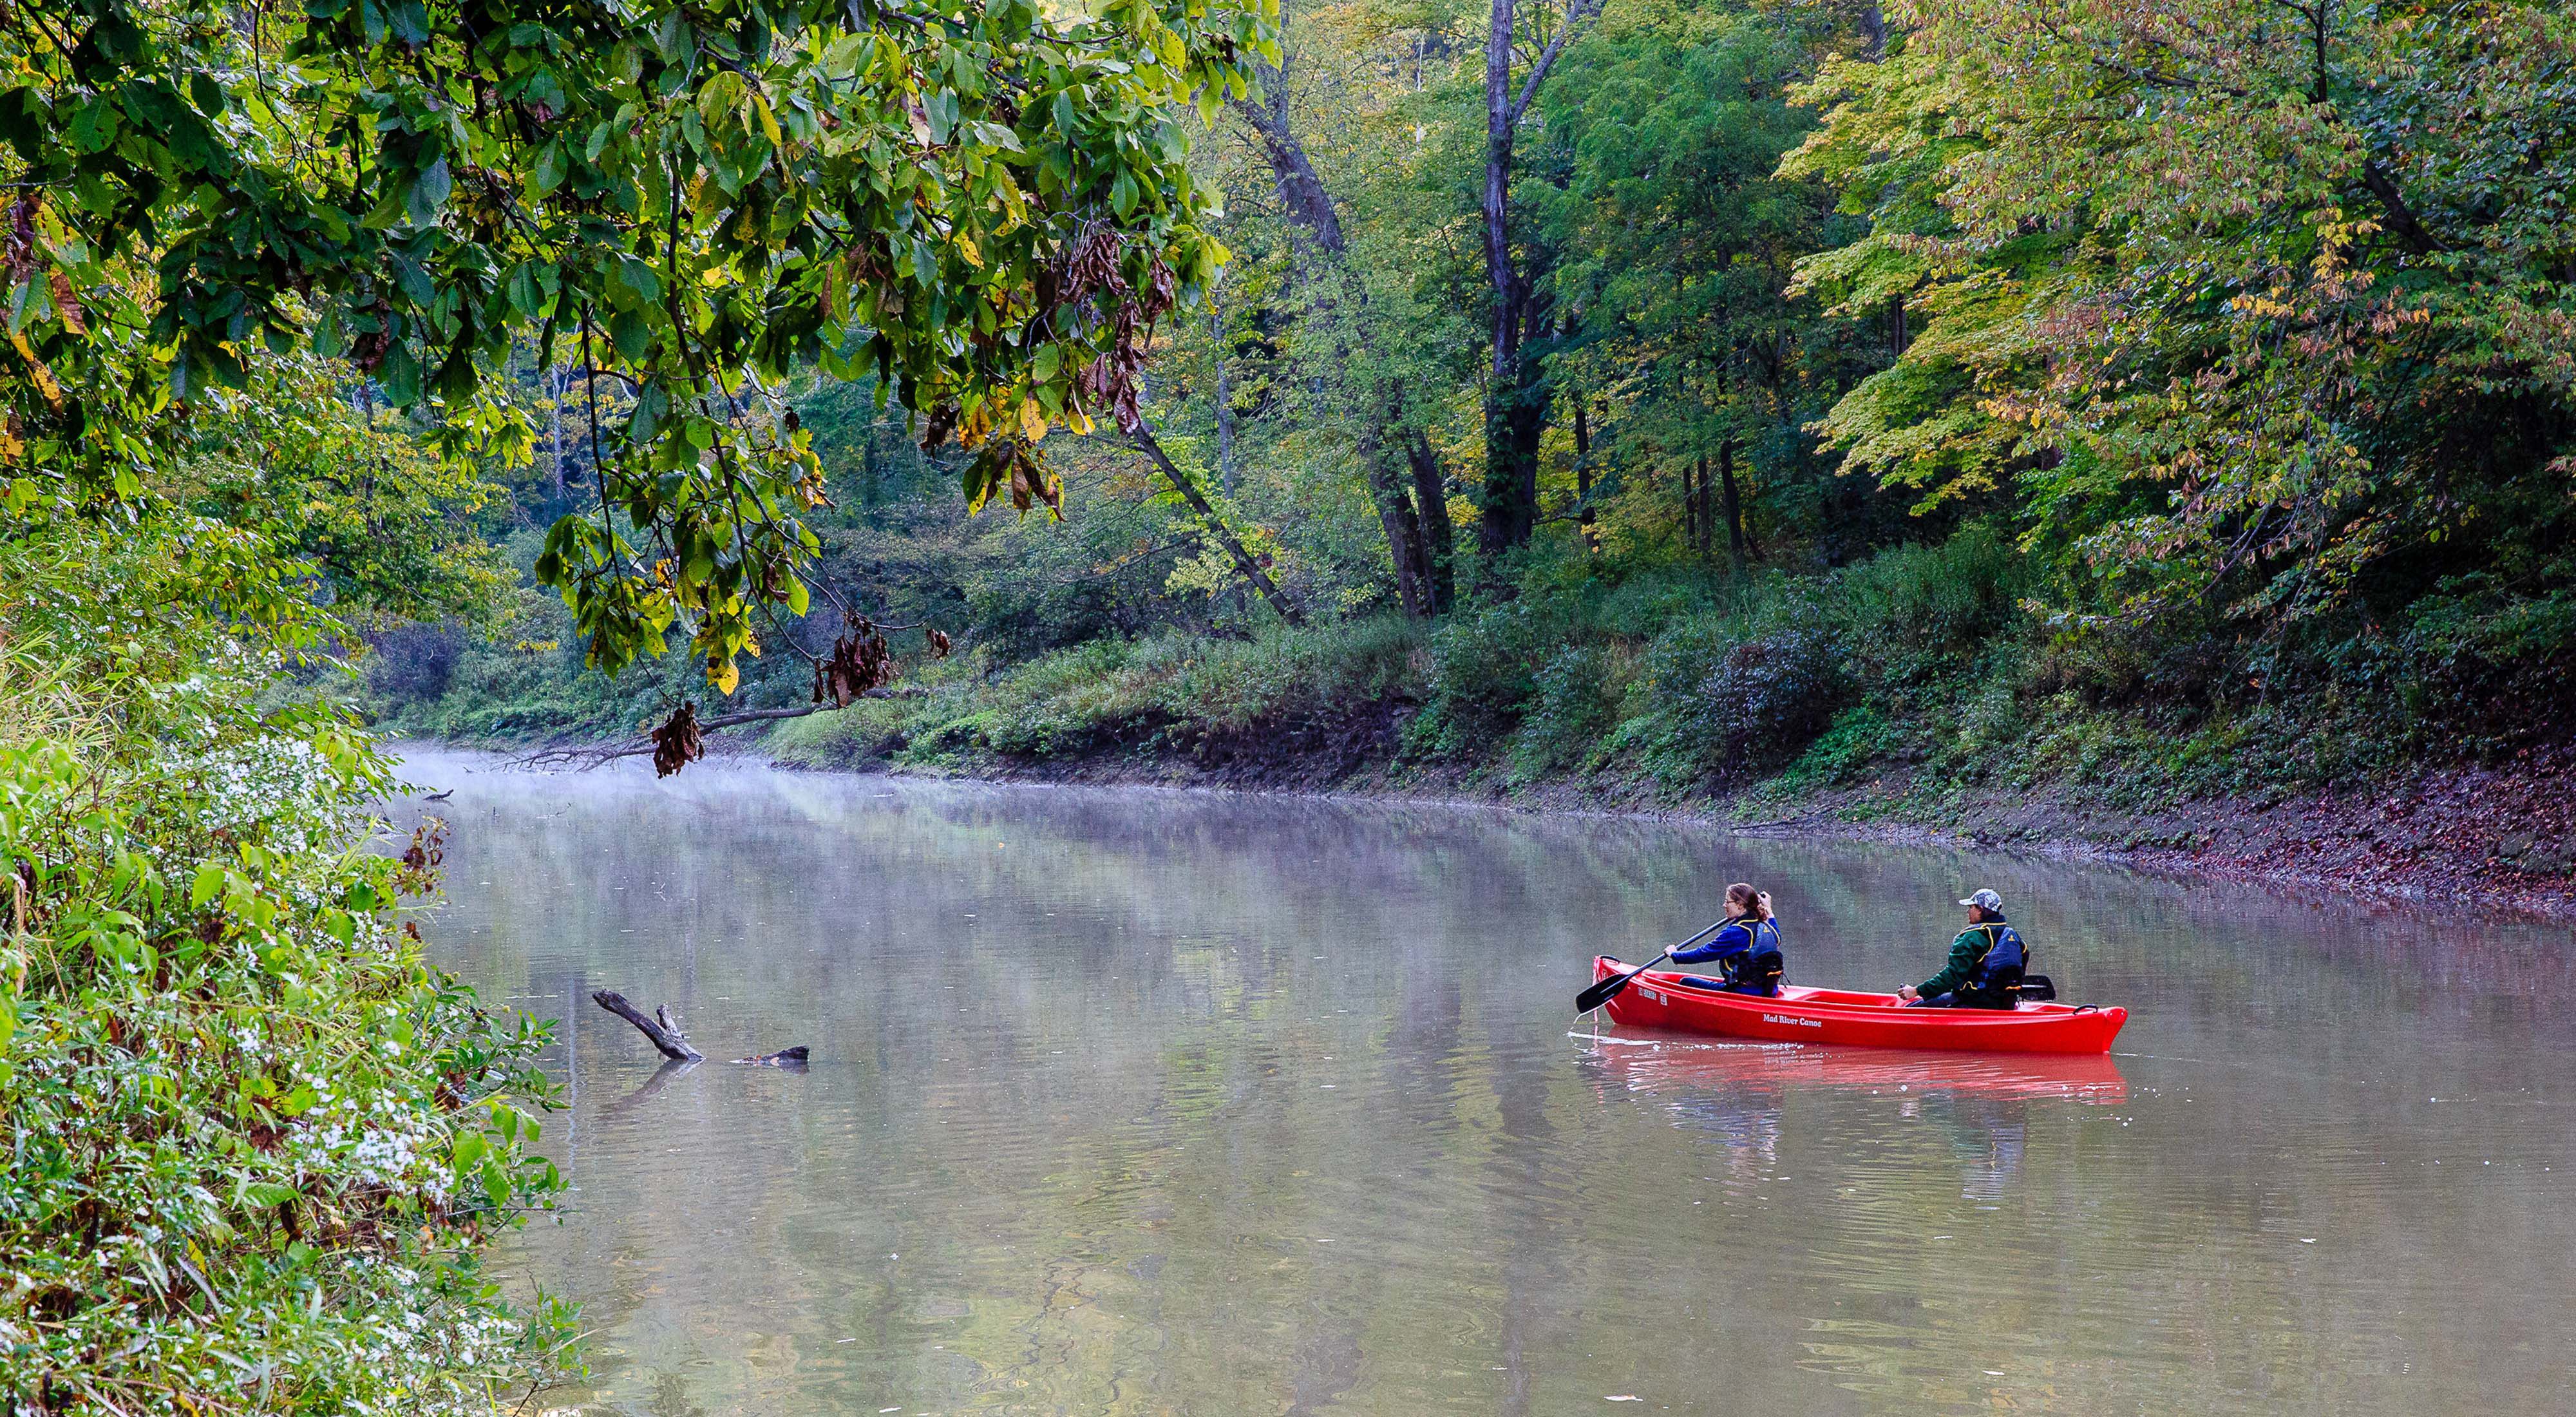 Two people paddle a red plastic canoe on a calm, broad stream lined with trees.